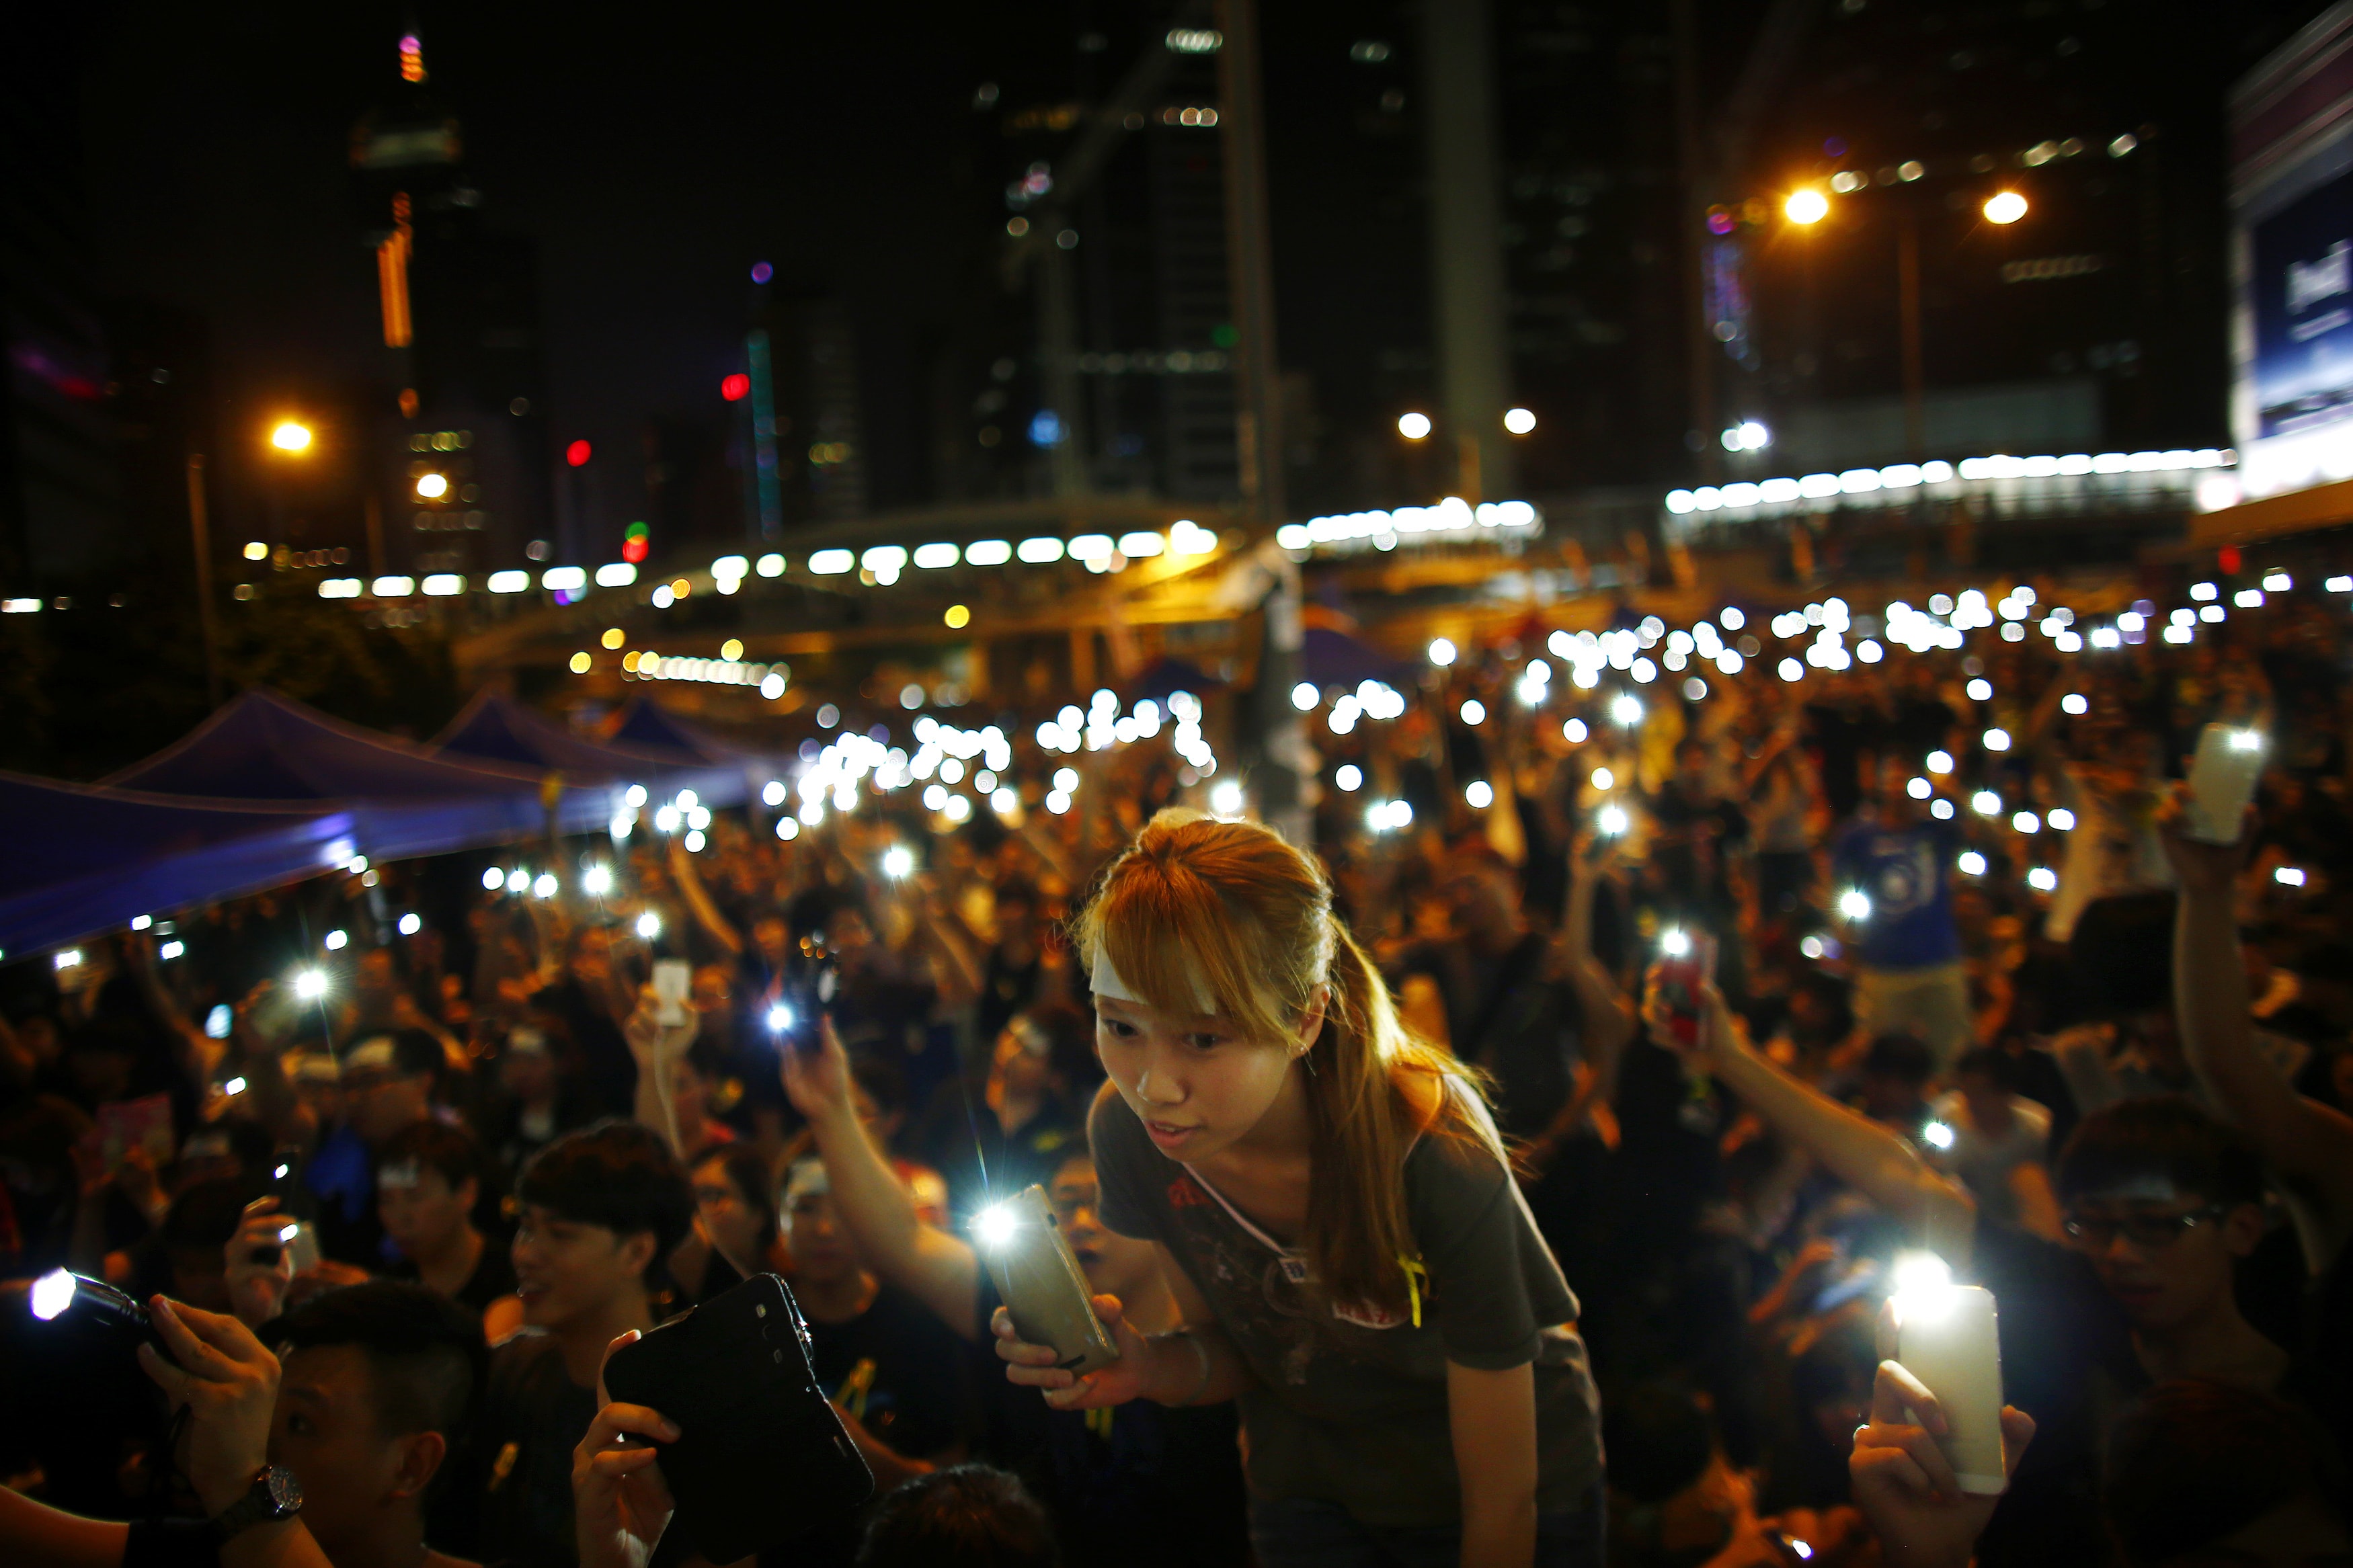 Protesters turn on their mobile phone flashlights as they block an area outside the government headquarters building in Hong Kong, 1 October 2014, REUTERS/Carlos Barria